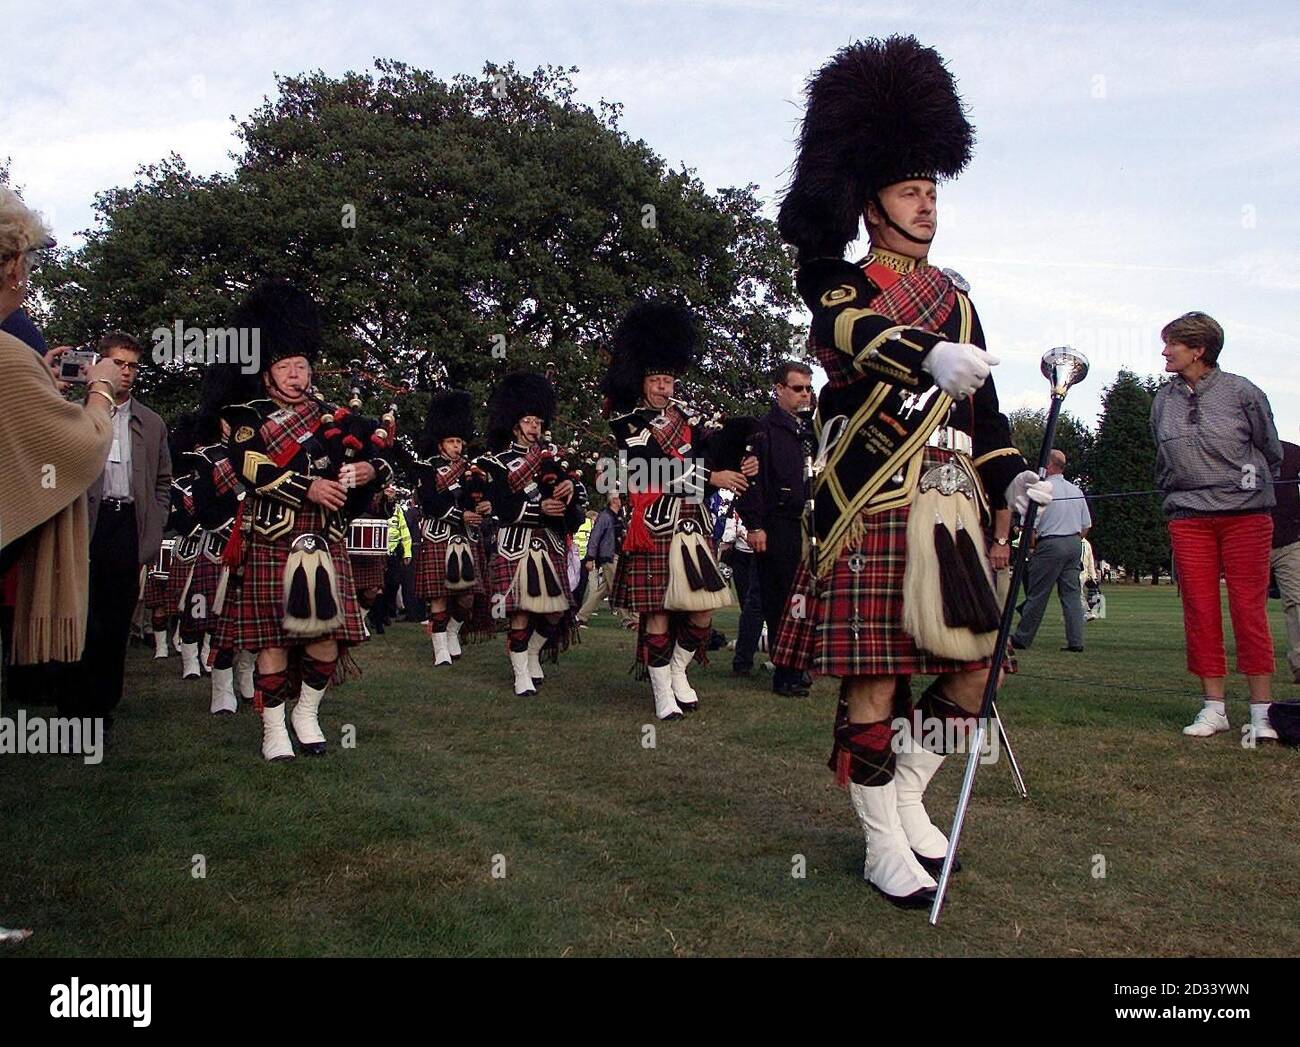 The Nottinghamshire Police Pipe Band lead the two teams out to the opening ceremony of the Ryder Cup at the Belfry near Sutton Coldfield, West Midlands. Stock Photo